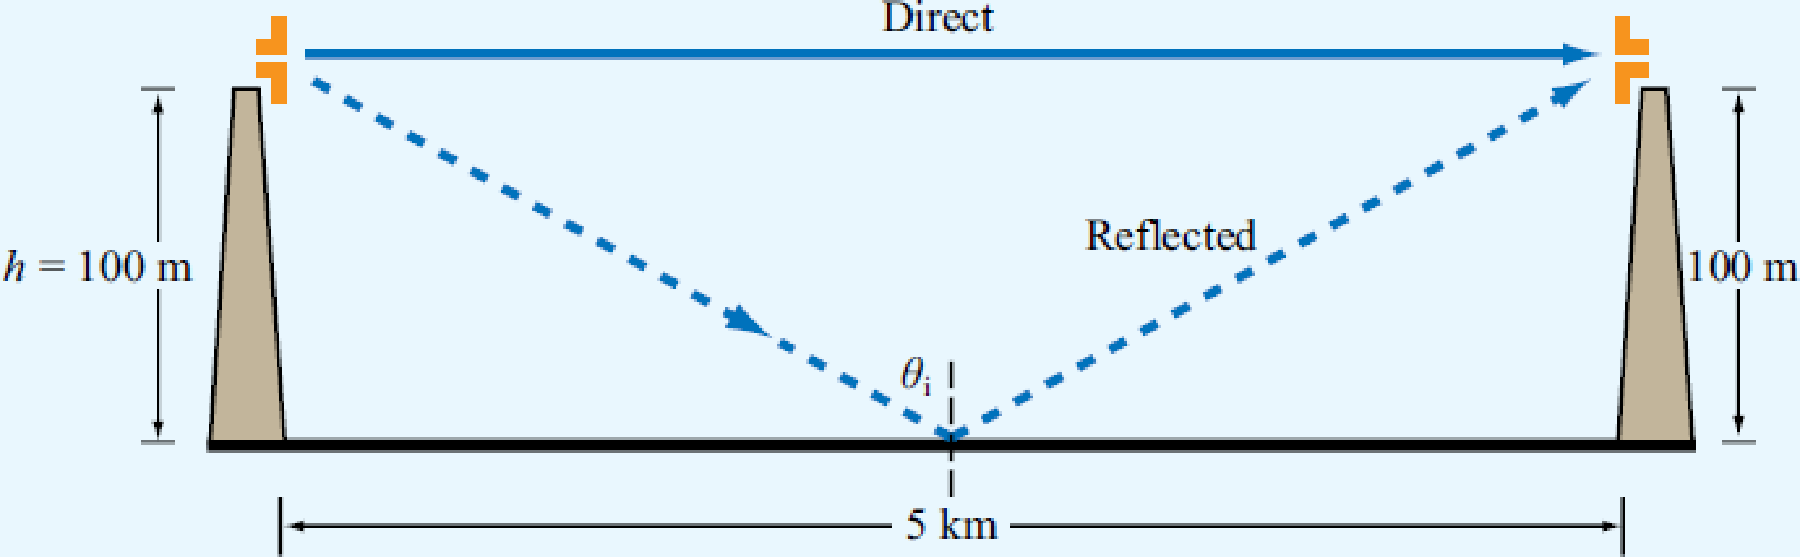 Chapter 9, Problem 27P, The configuration shown in Fig. P9.27 depicts two vertically oriented half-wave dipole antennas 